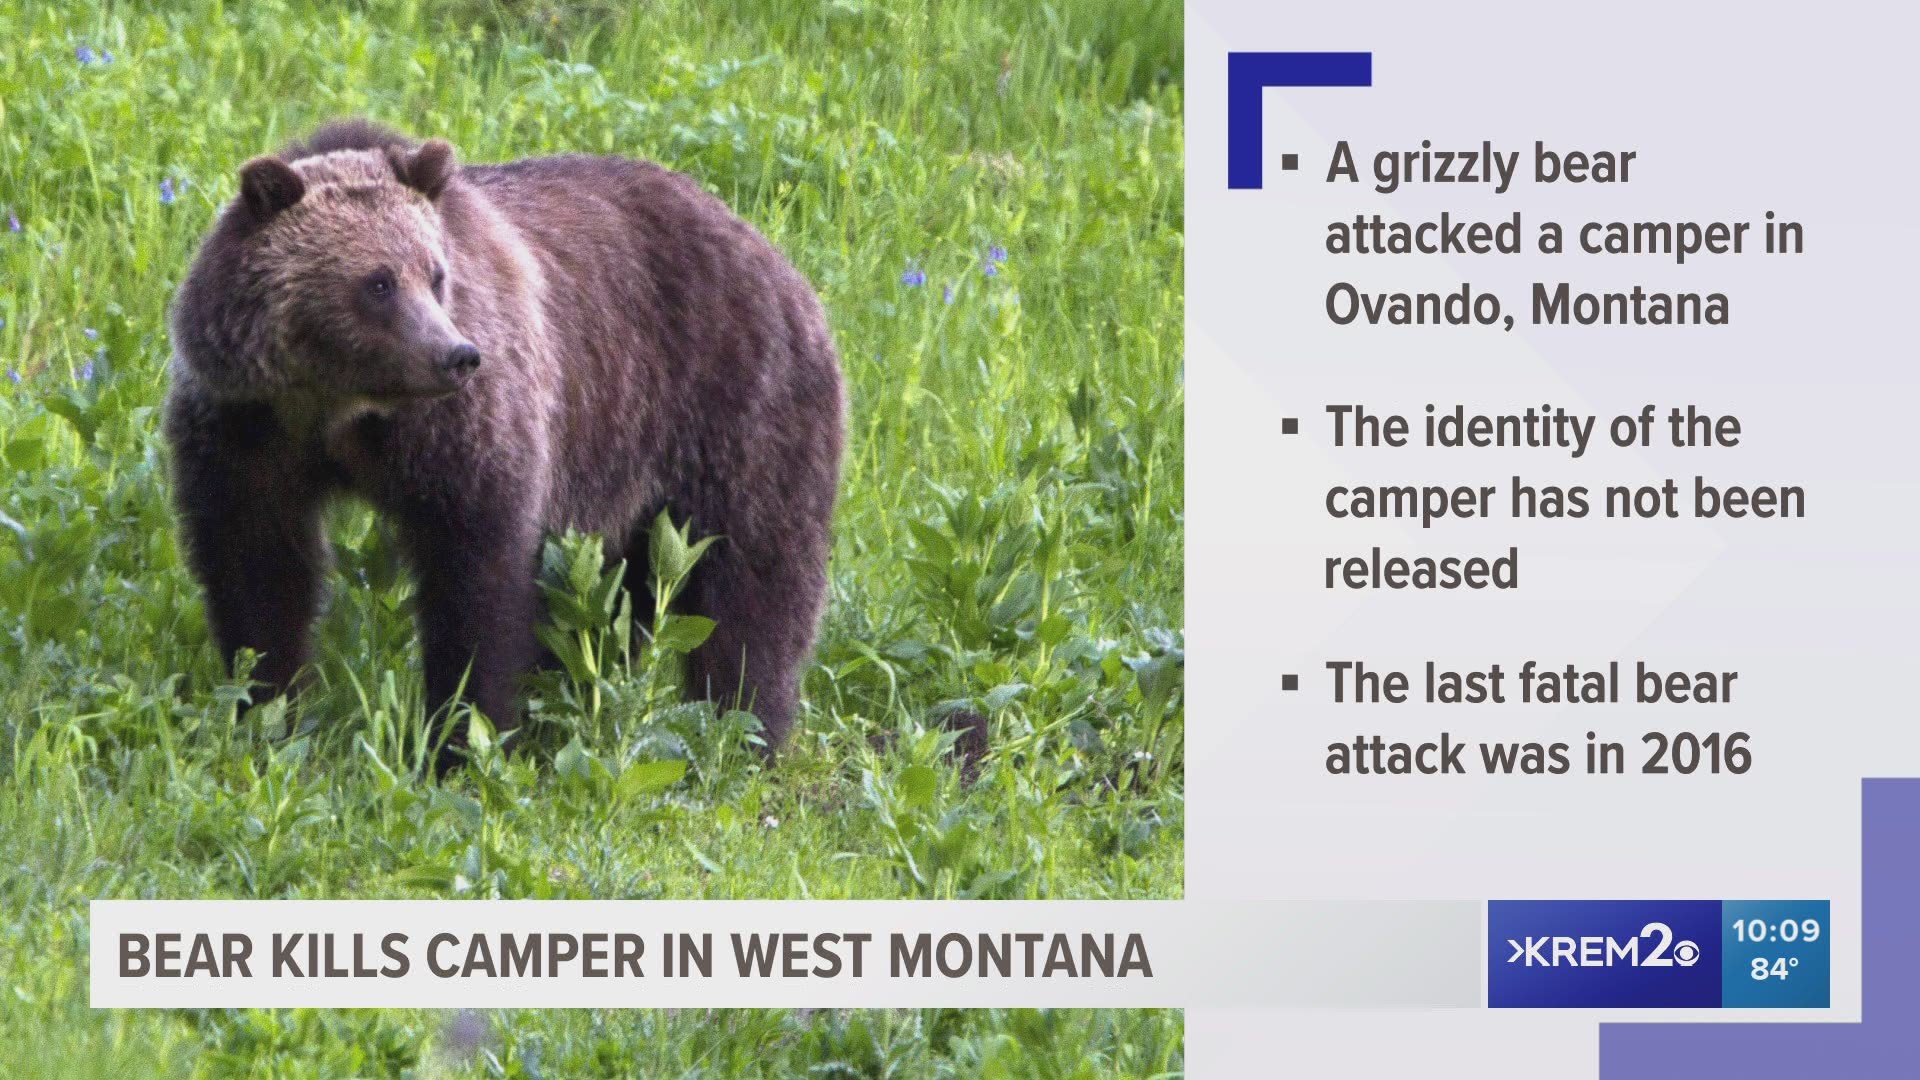 The last fatal bear attack in the area was in 2016.